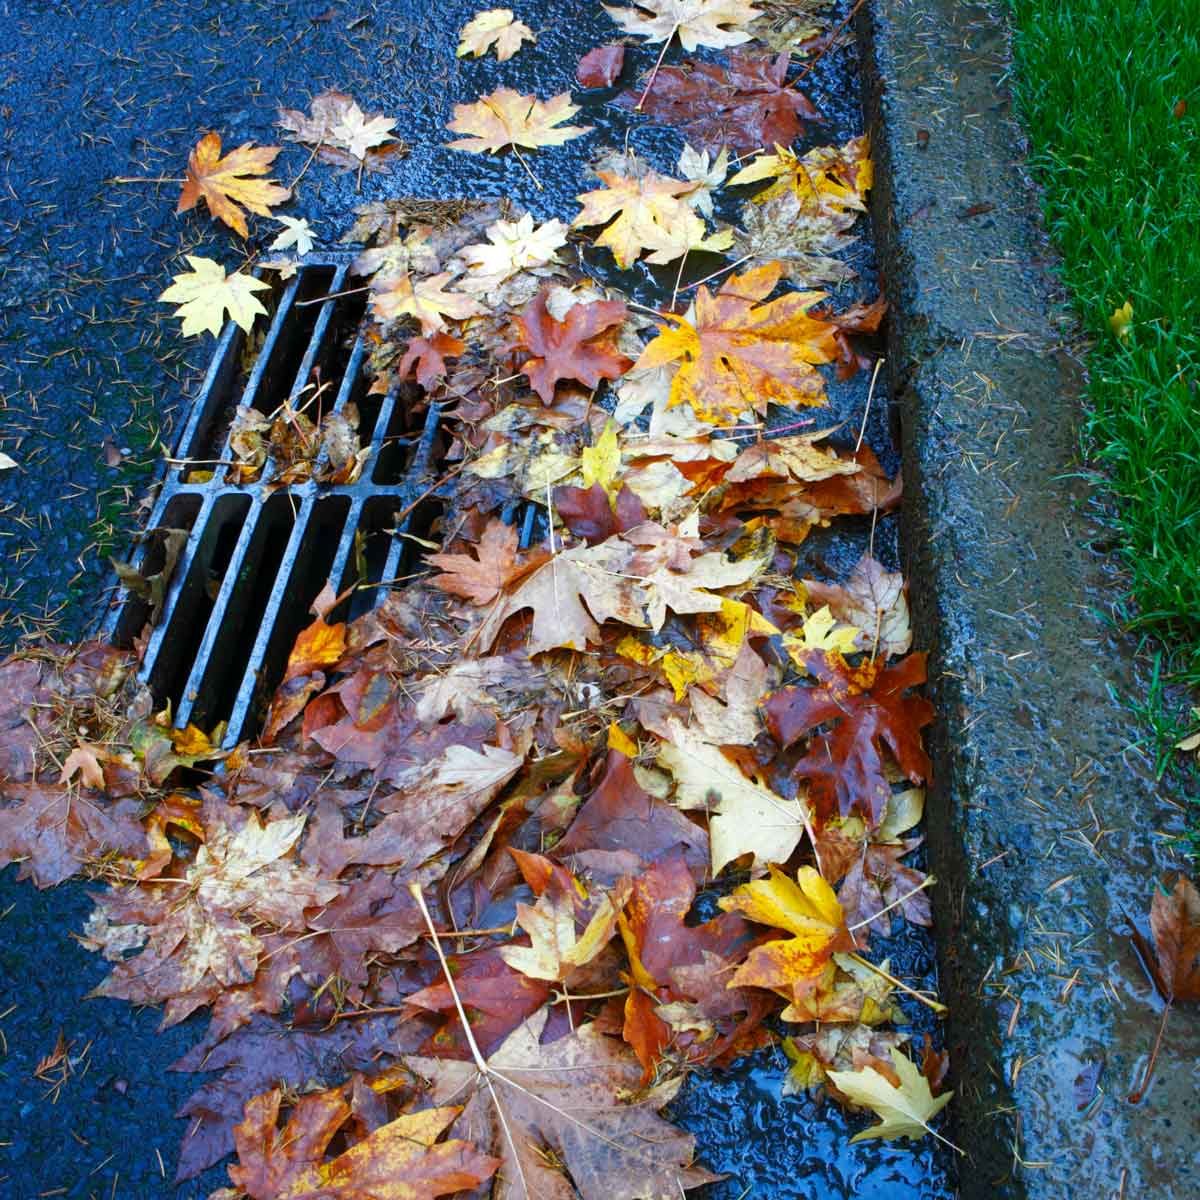 Clear Bags of Fall Leaves with Moisture Inside by Curb with Yard